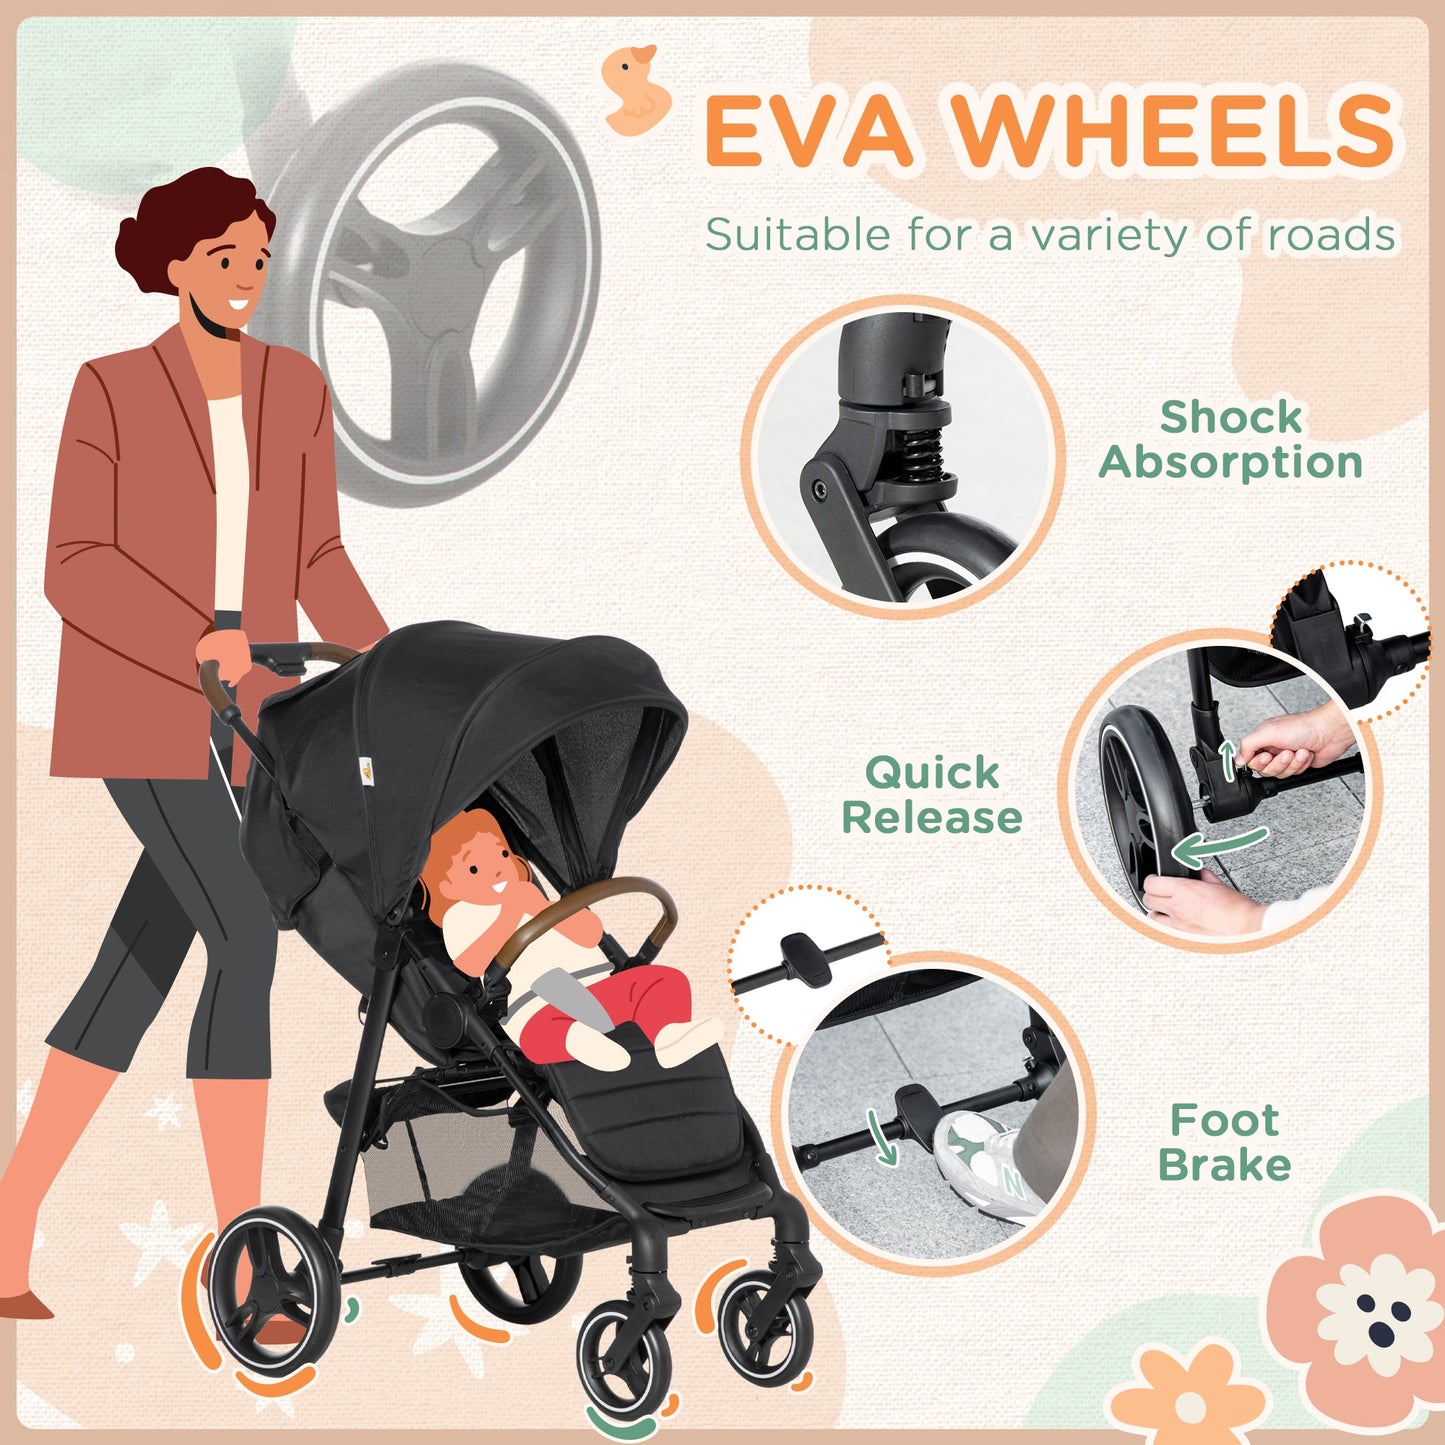 -Qaba Lightweight Baby Stroller, Toddler Travel Stroller with One Hand Fold, Compact Stroller with Storage Basket, All Wheel Suspension, Black - Outdoor Style Company